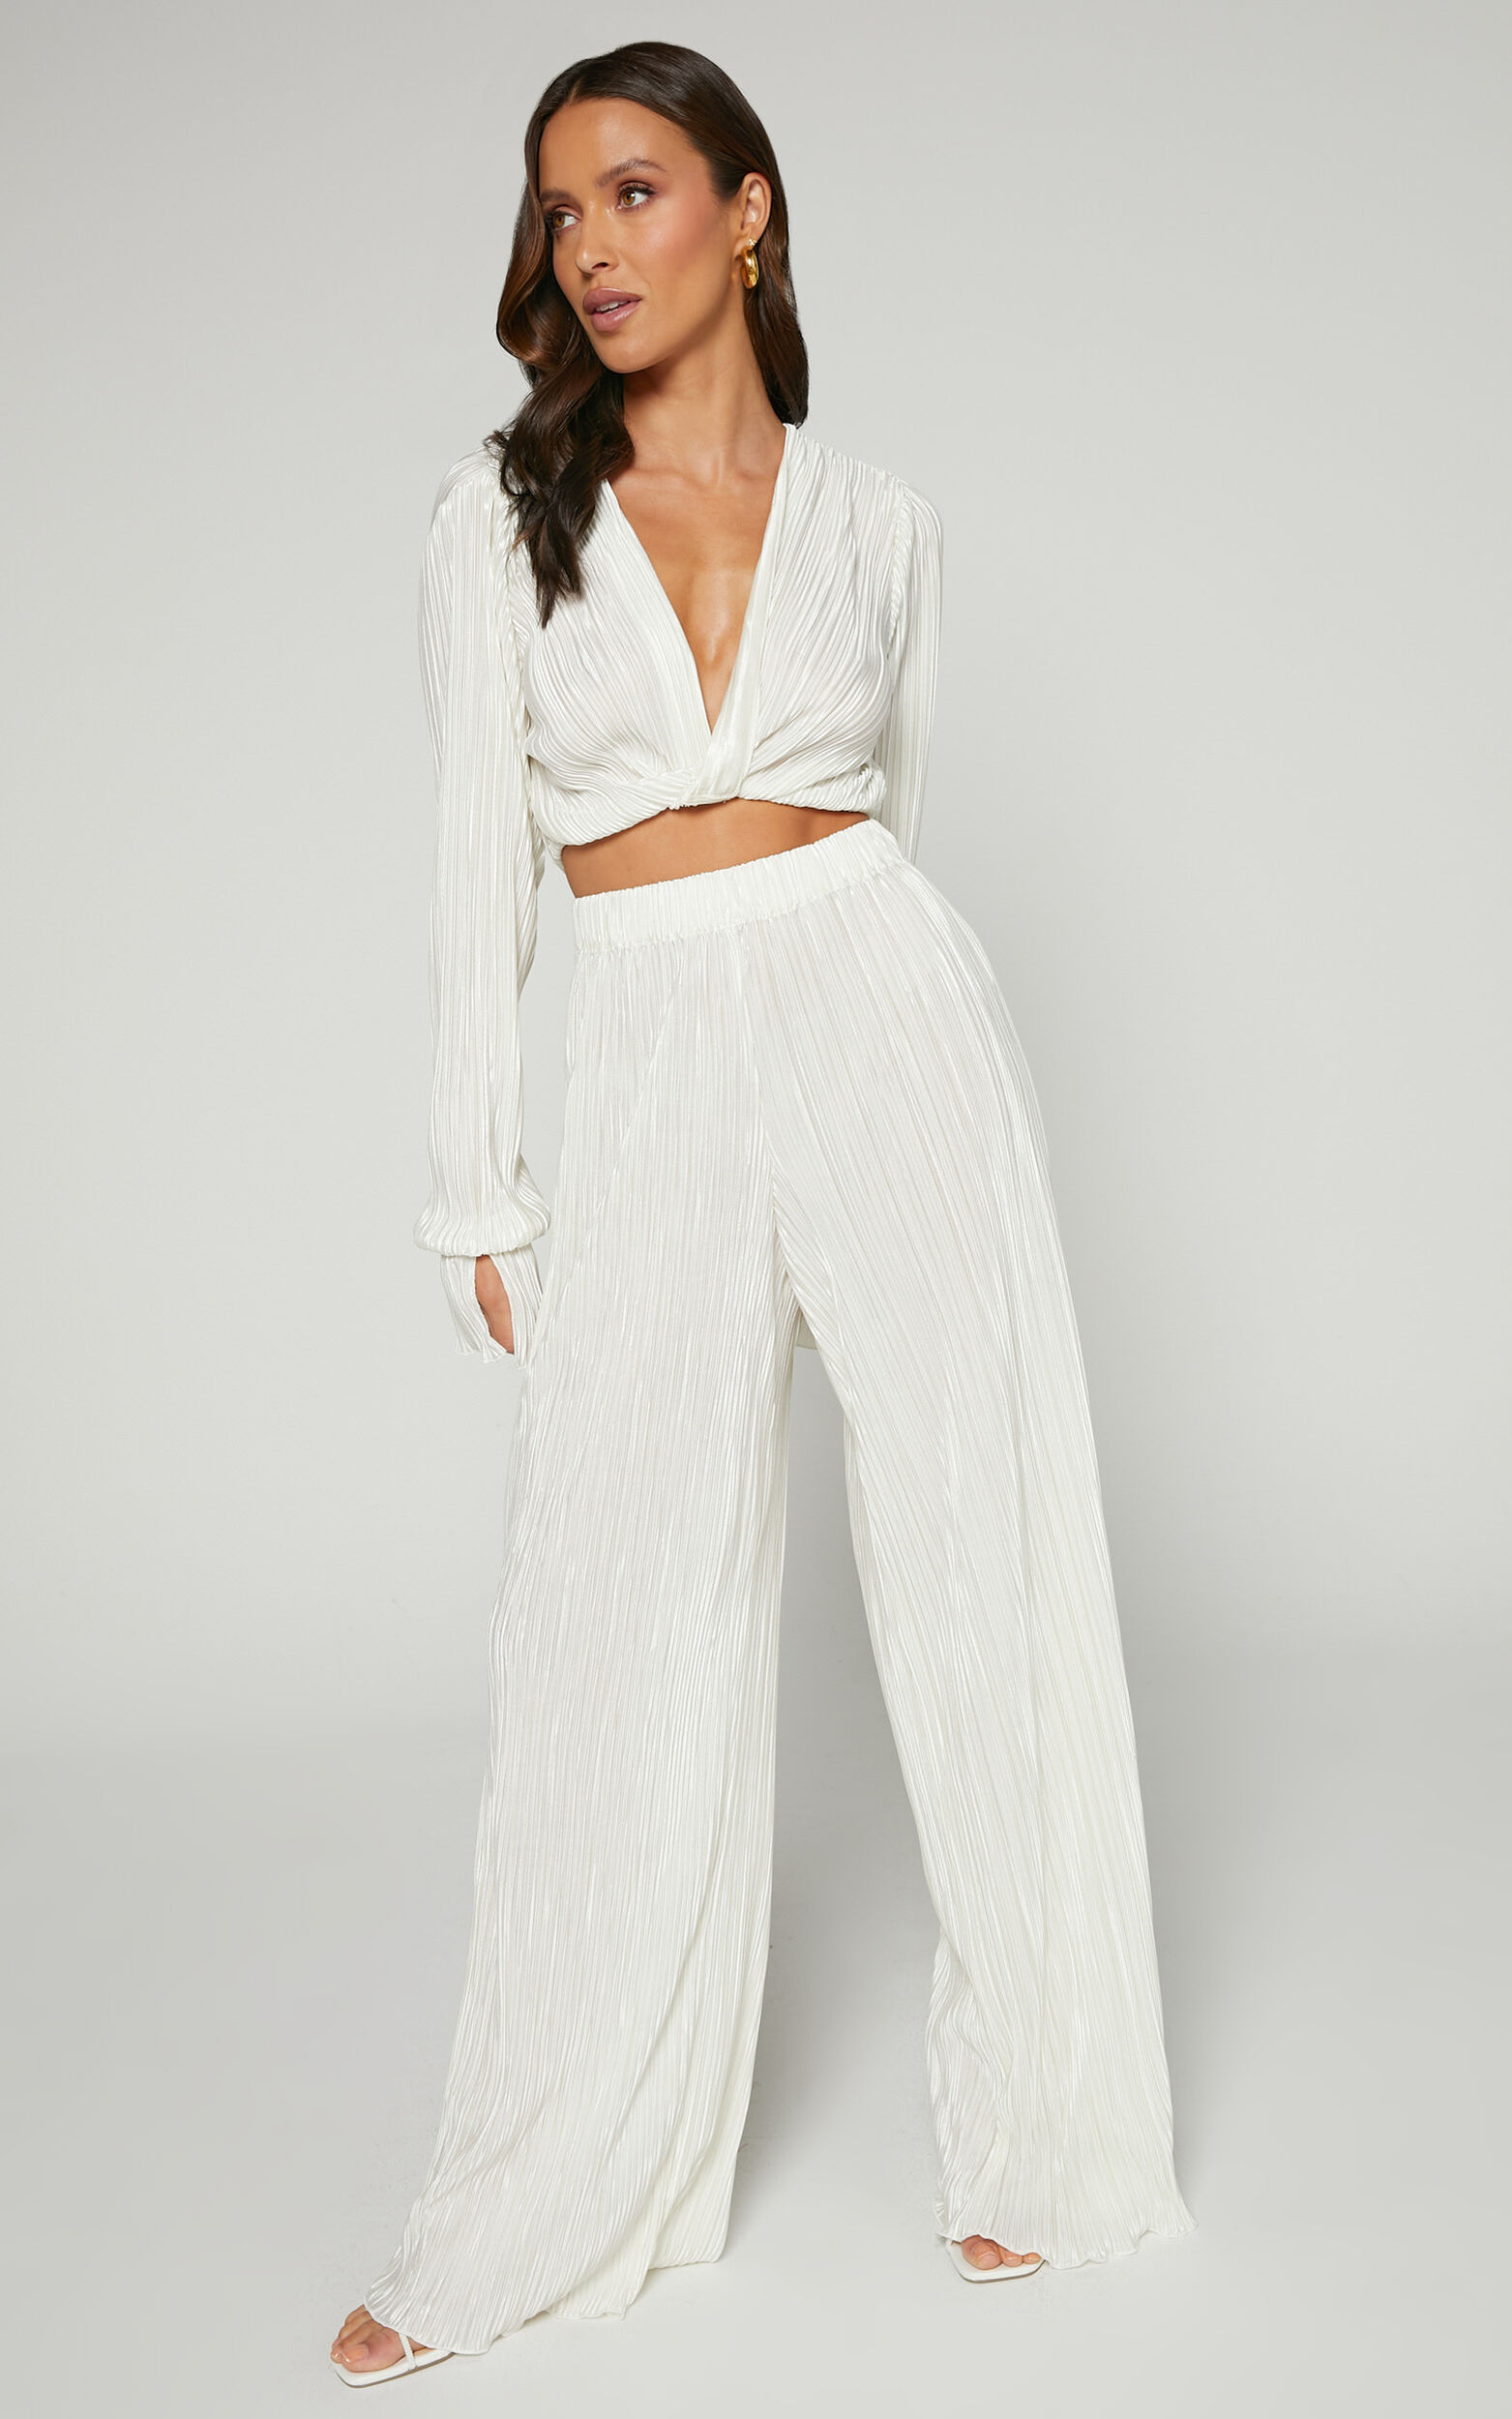 Aluna Two Piece Set - Plisse Twist Front Crop Top and Wide Leg Pants Set in Oyster - 04, CRE1